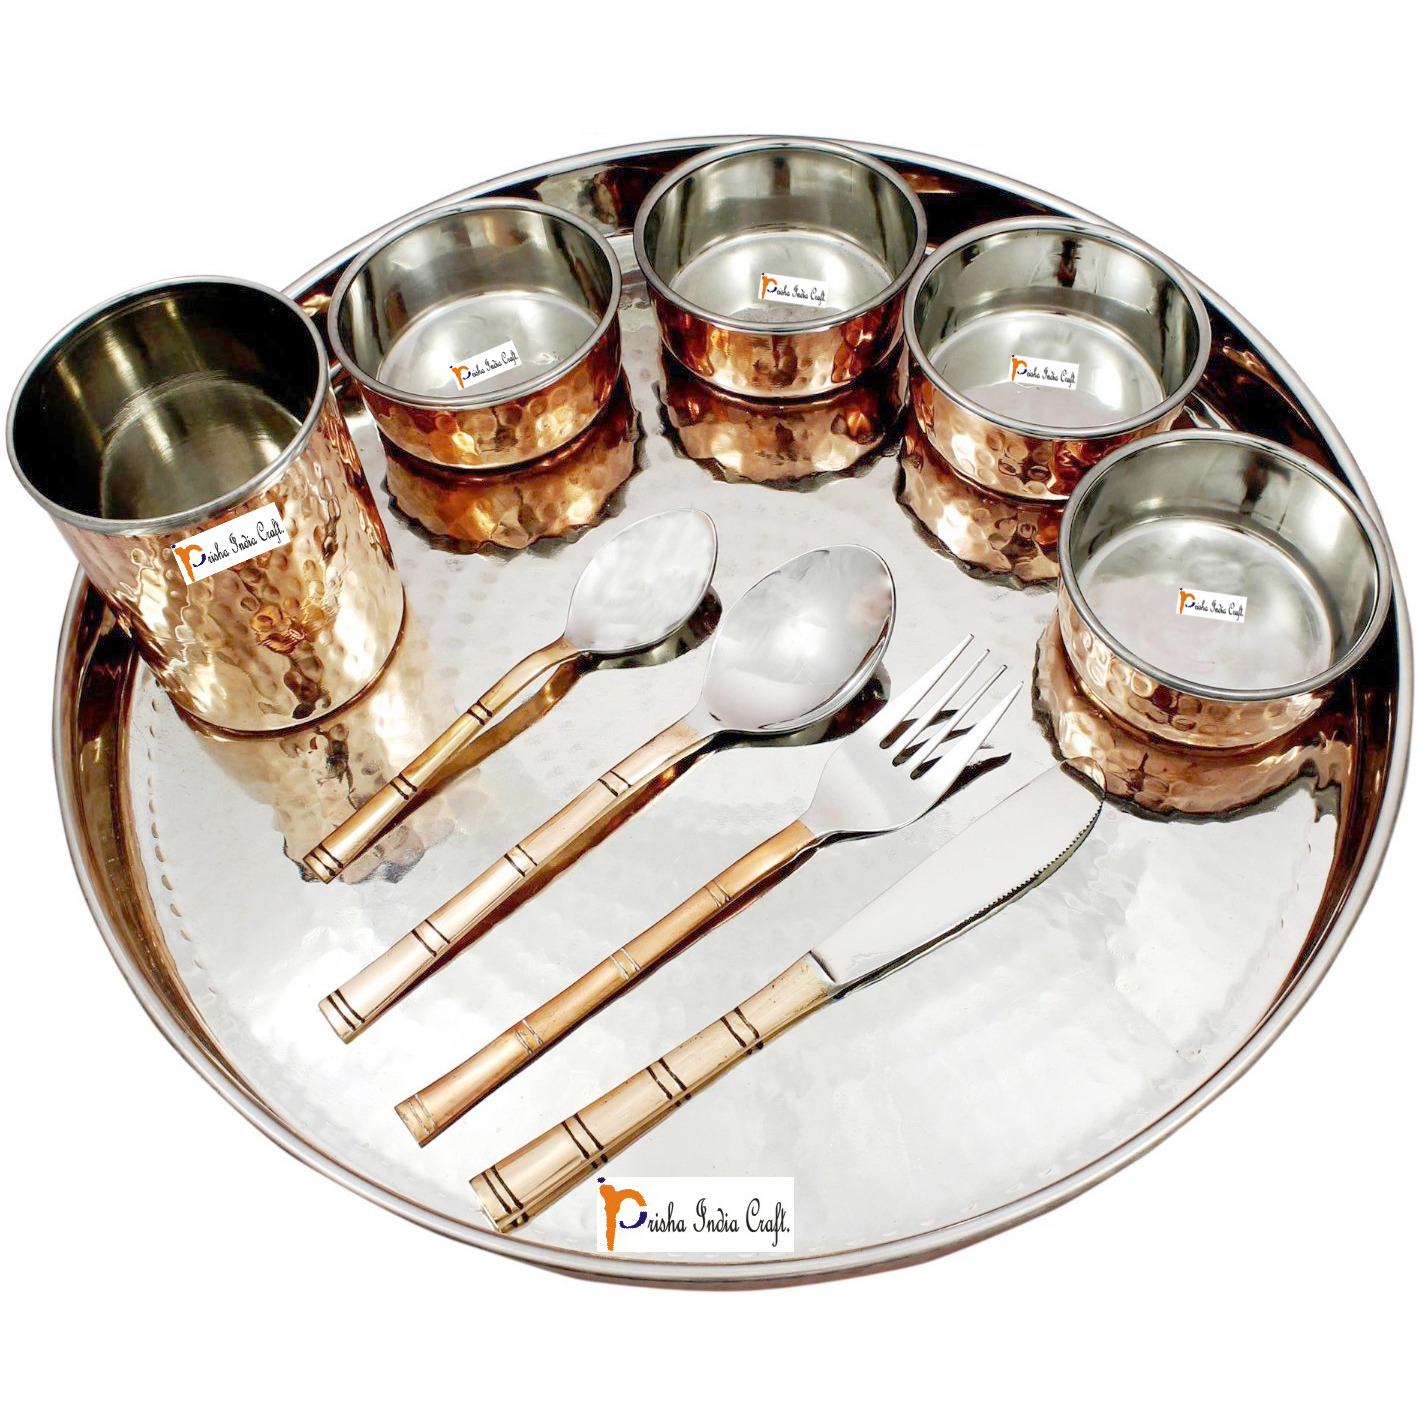 Prisha India Craft B. Set of 4 Dinnerware Traditional Stainless Steel Copper Dinner Set of Thali Plate, Bowls, Glass and Spoons, Dia 13  With 1 Luxury Style Pure Copper Pitcher Jug - Christmas Gift